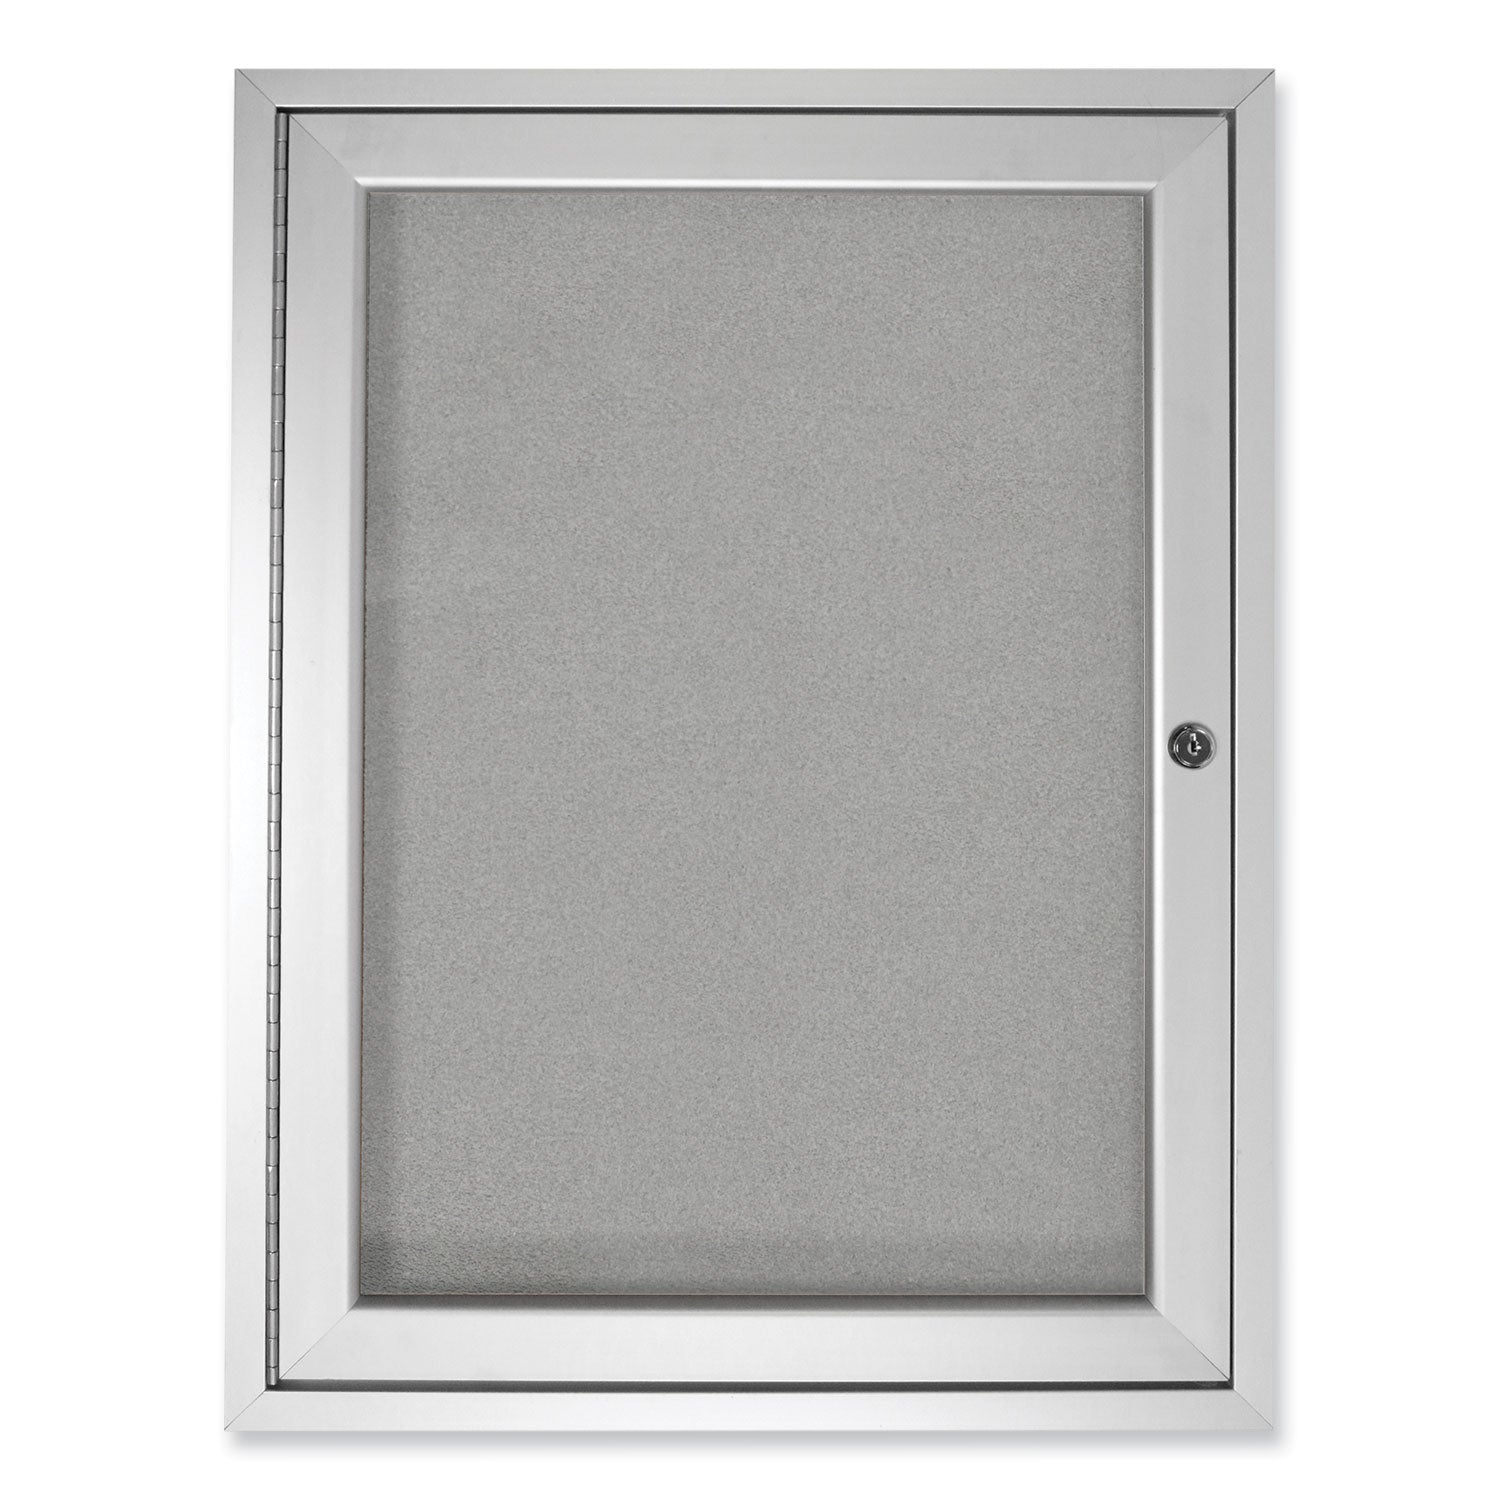 1-door-enclosed-vinyl-bulletin-board-with-satin-aluminum-frame-30-x-36-silver-surface-ships-in-7-10-business-days_ghepa13630vx193 - 1